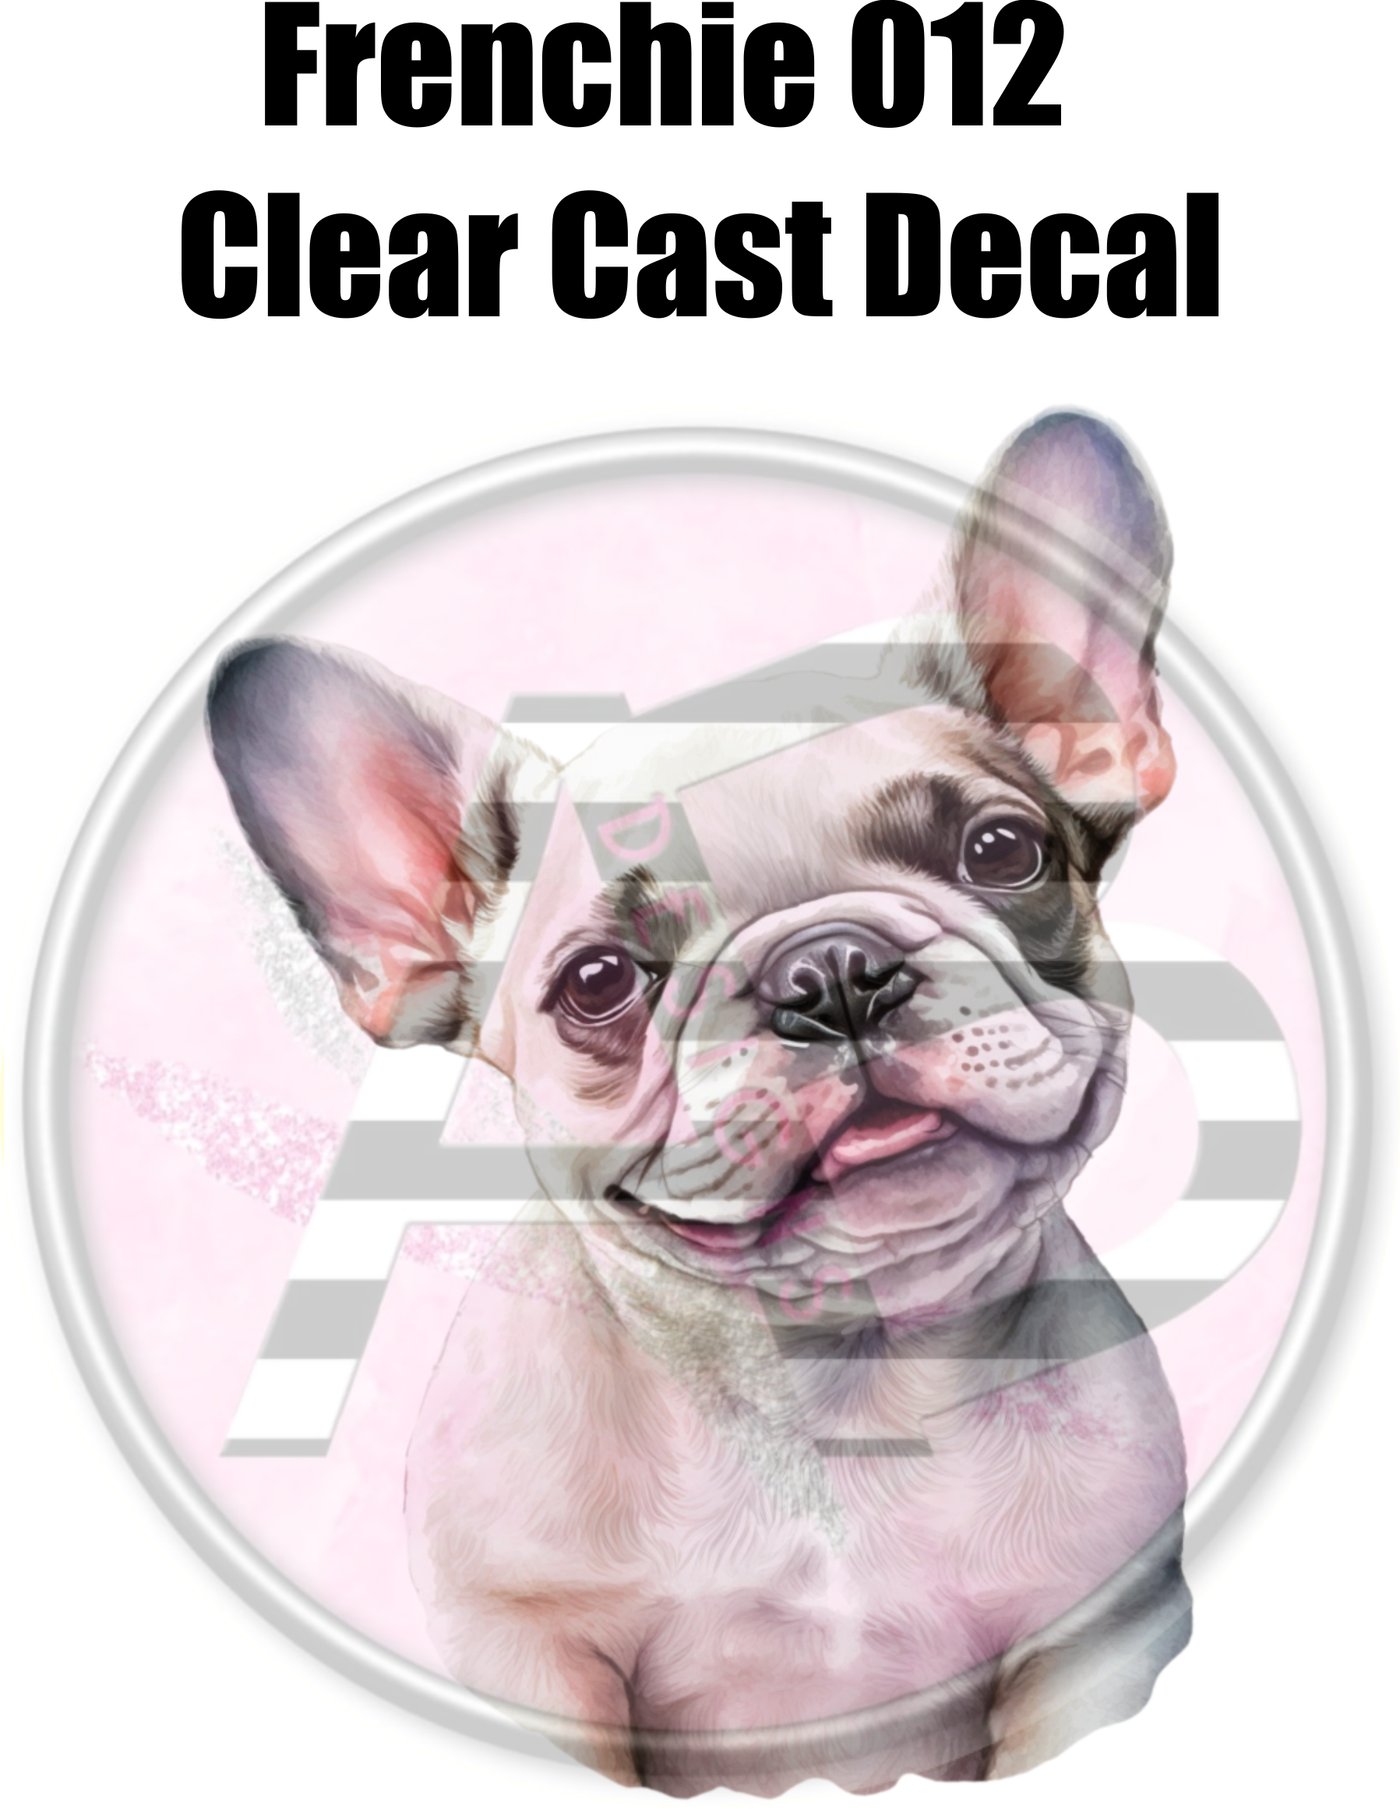 Frenchie 012 - Clear Cast Decal